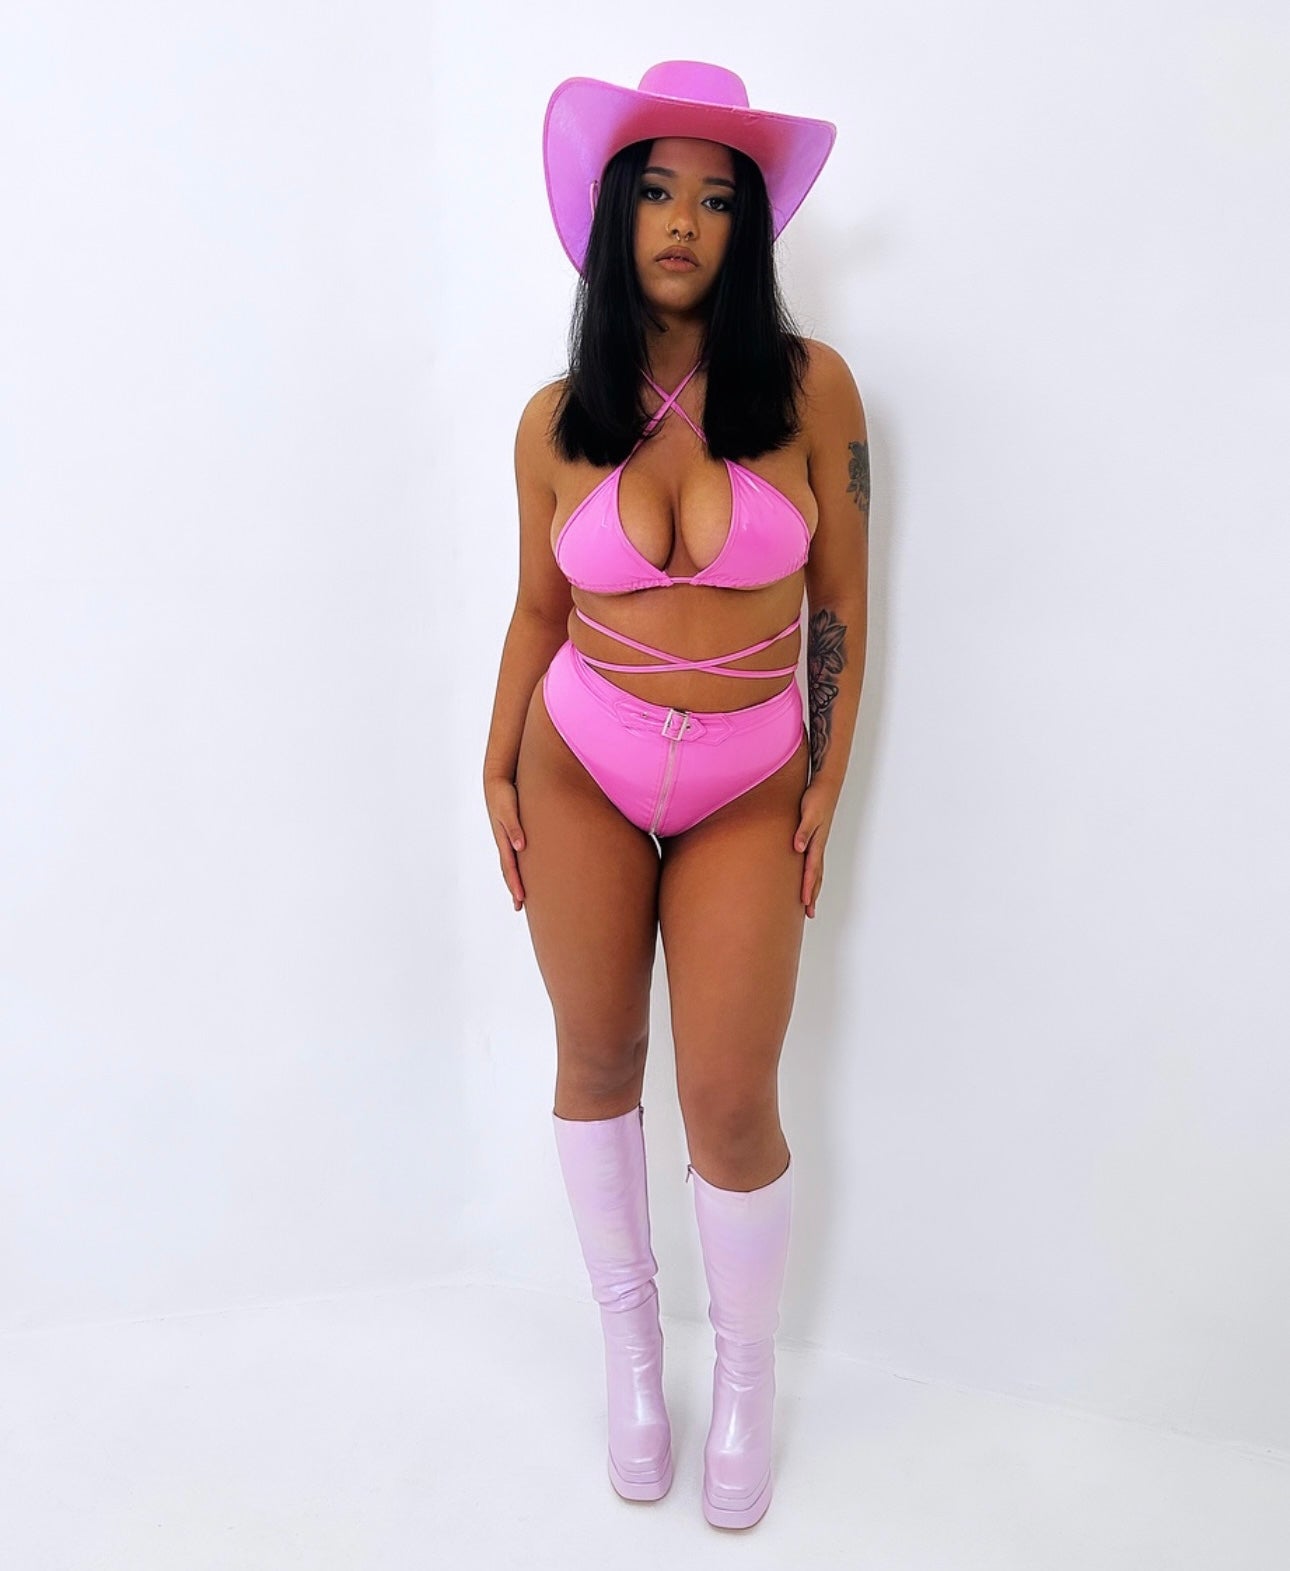 IBIZA SET PINK RAVE OUTFIT, FESTIVAL OUTFIT, VINYL KNICKERS, BIKINI